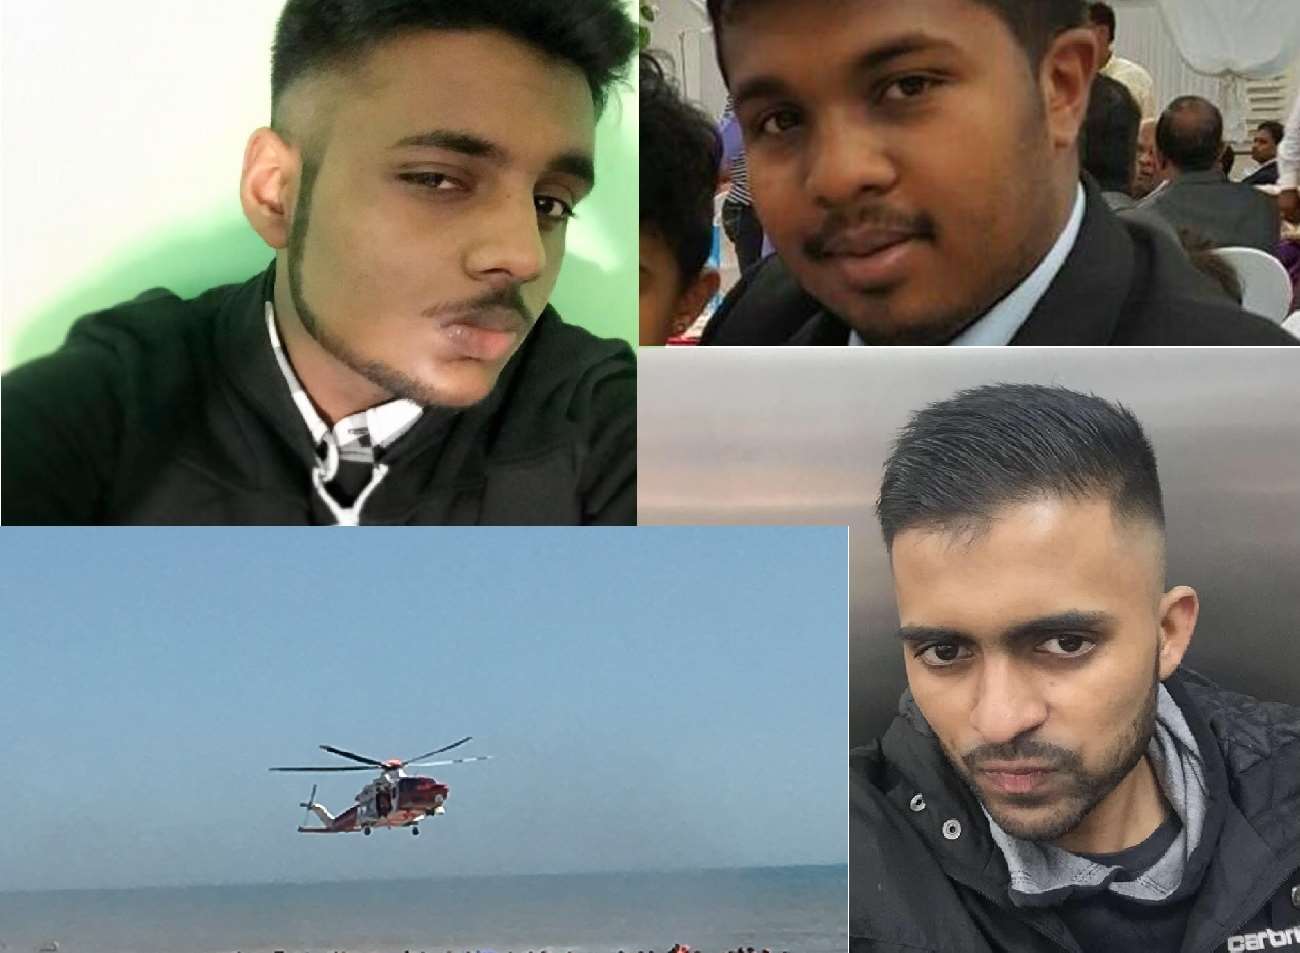 From top left; Ken Nathan, Nitharsan Ravi, and Inthushan Sriskantharaja have all been named locally as the victims